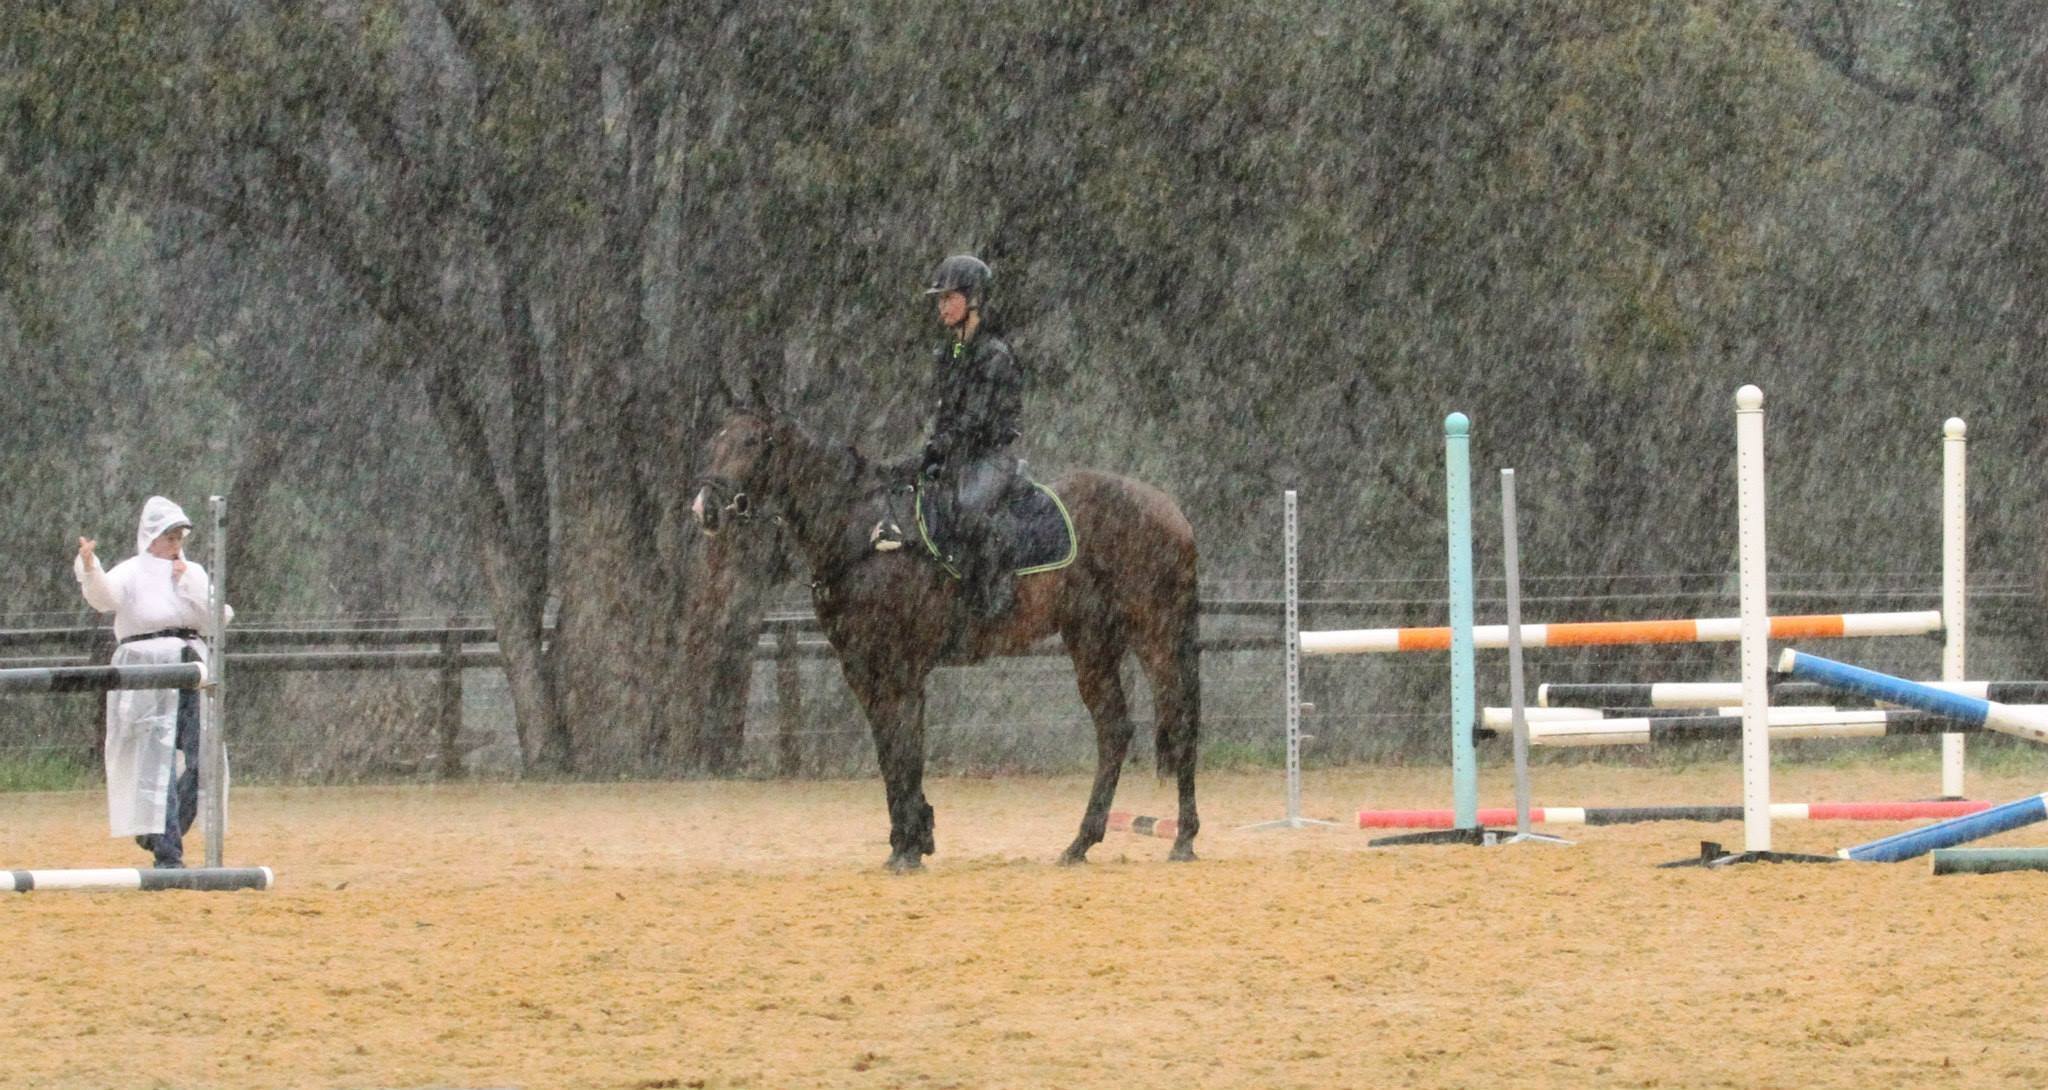 Clinic in pouring rain